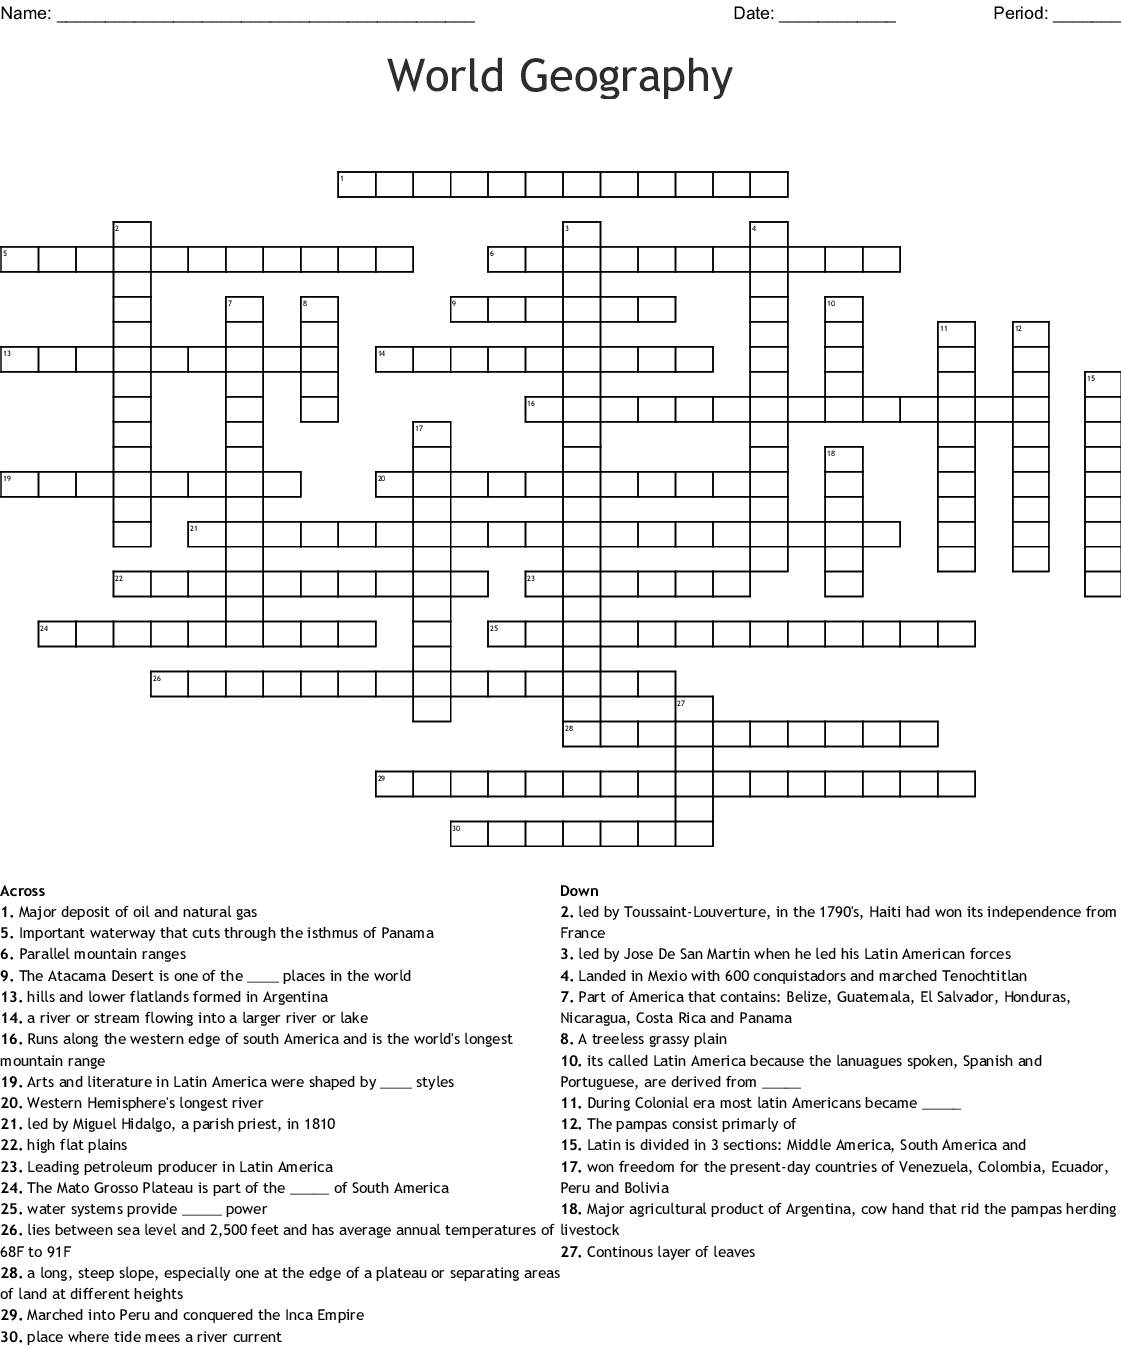 World Geography Crossword Puzzle Printable